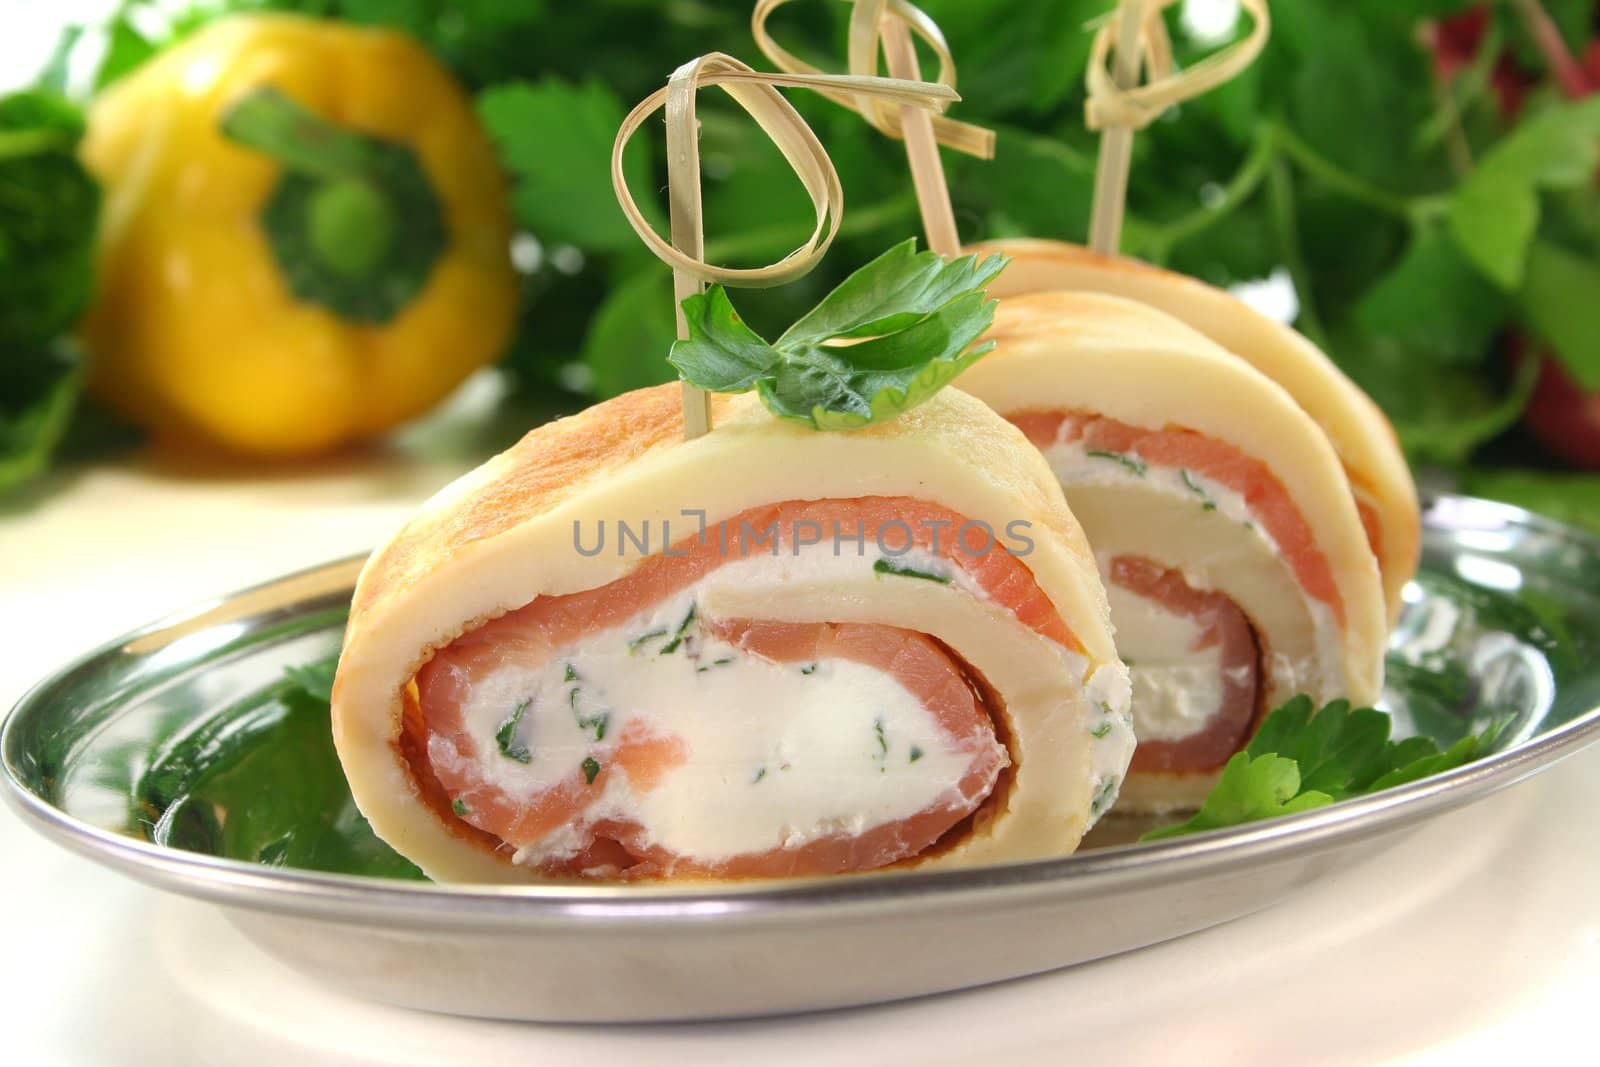 Pancakes filled with smoked salmon and cream cheese